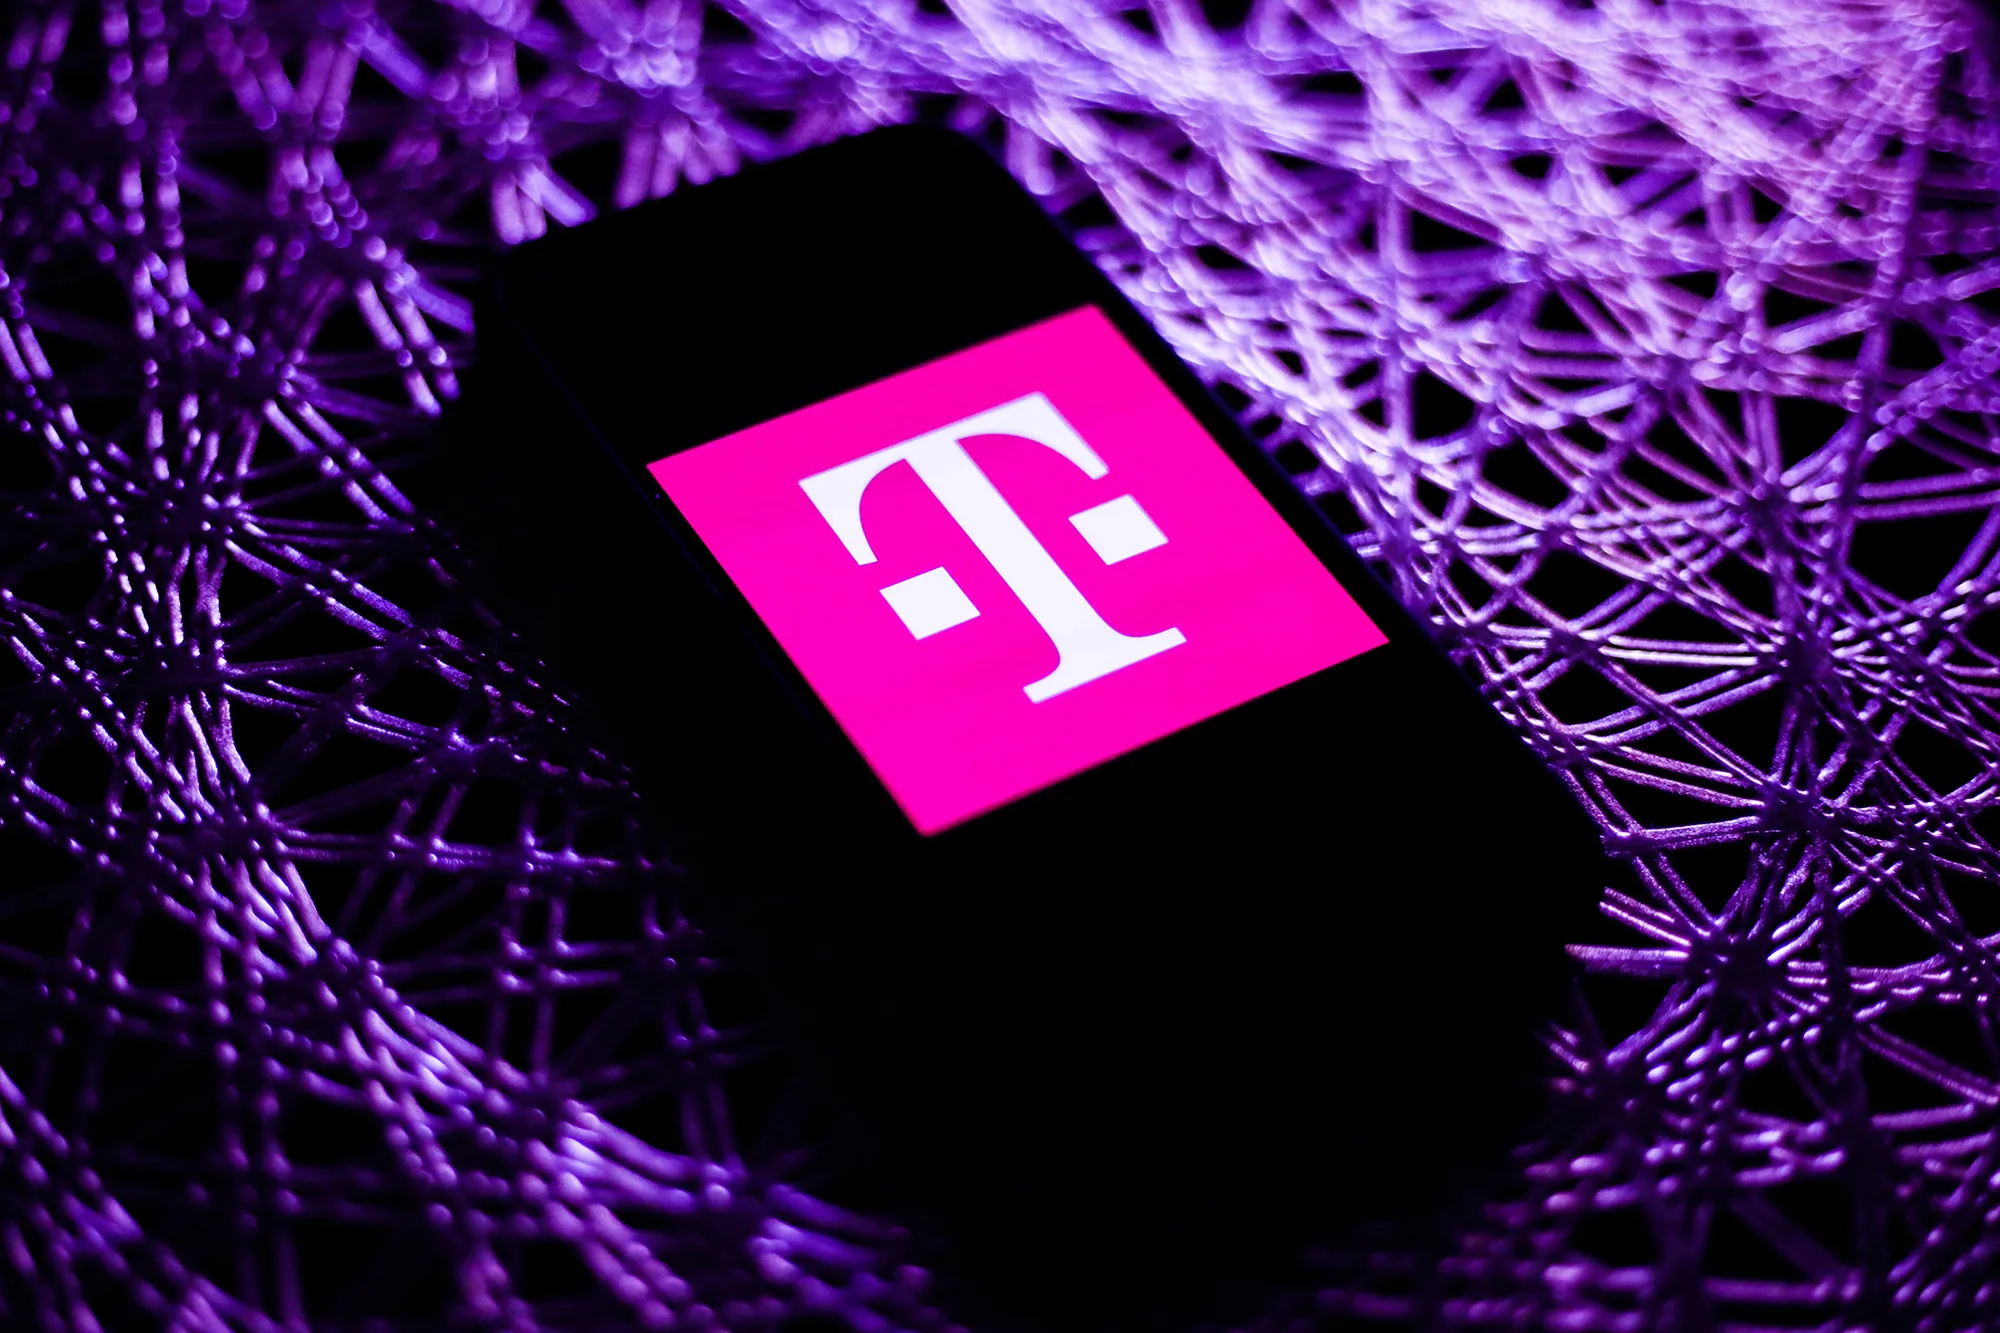 Say Goodbye to Low Bills: T-Mobile to Increase Prices for Some Old Plans This Summer